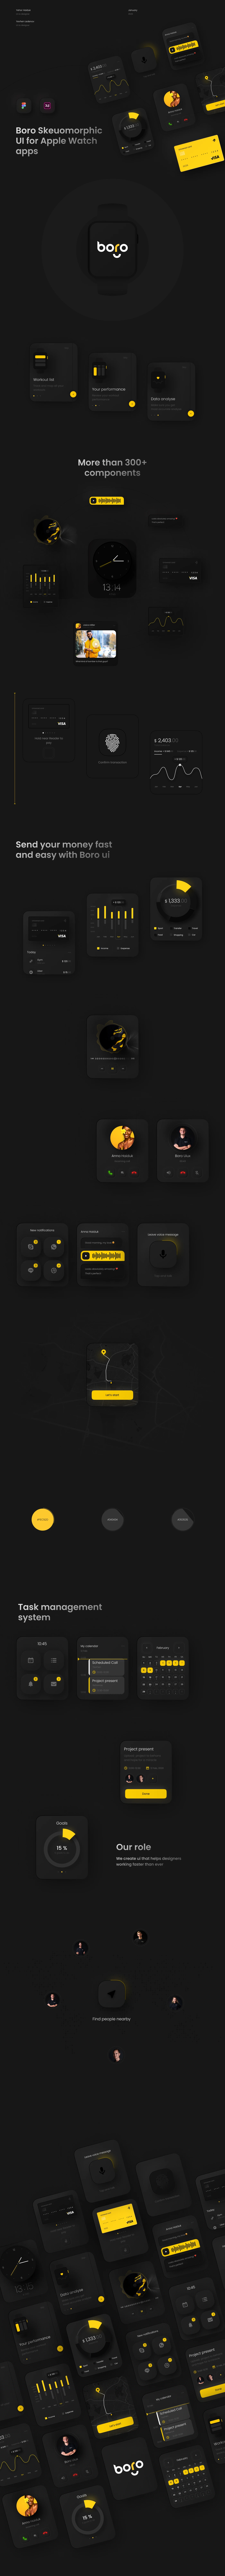 Boro Free UI Kit for Apple Watch Apps - A clean and modern look for the Apple Watch user interface.